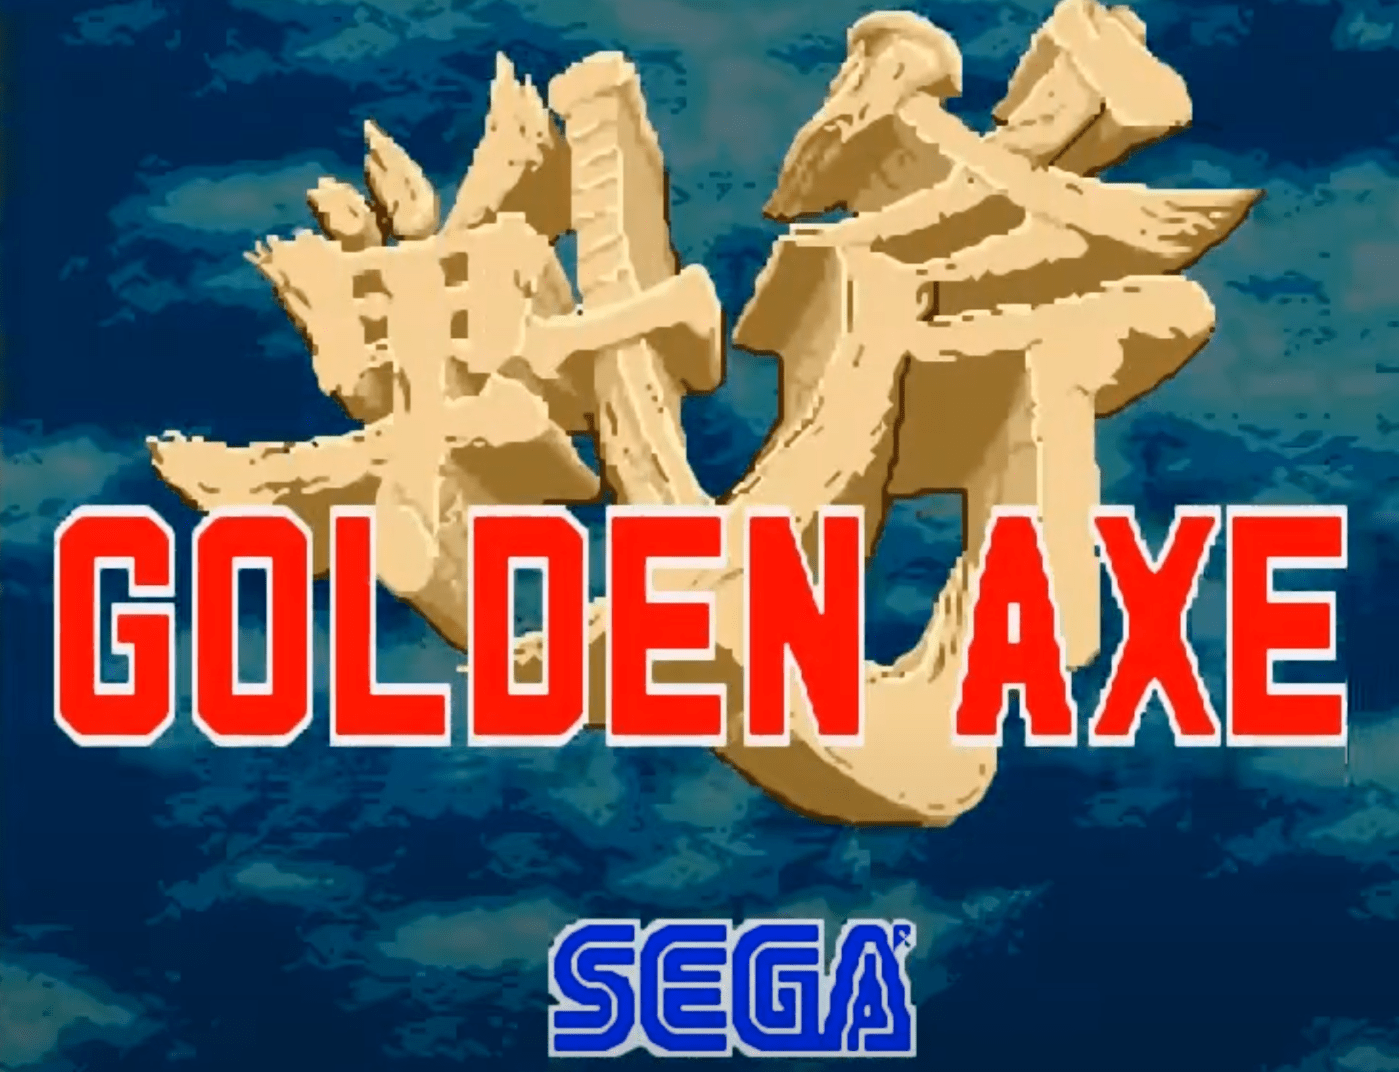 There’s a TV show coming based on Sega's classic arcade game Golden Axe